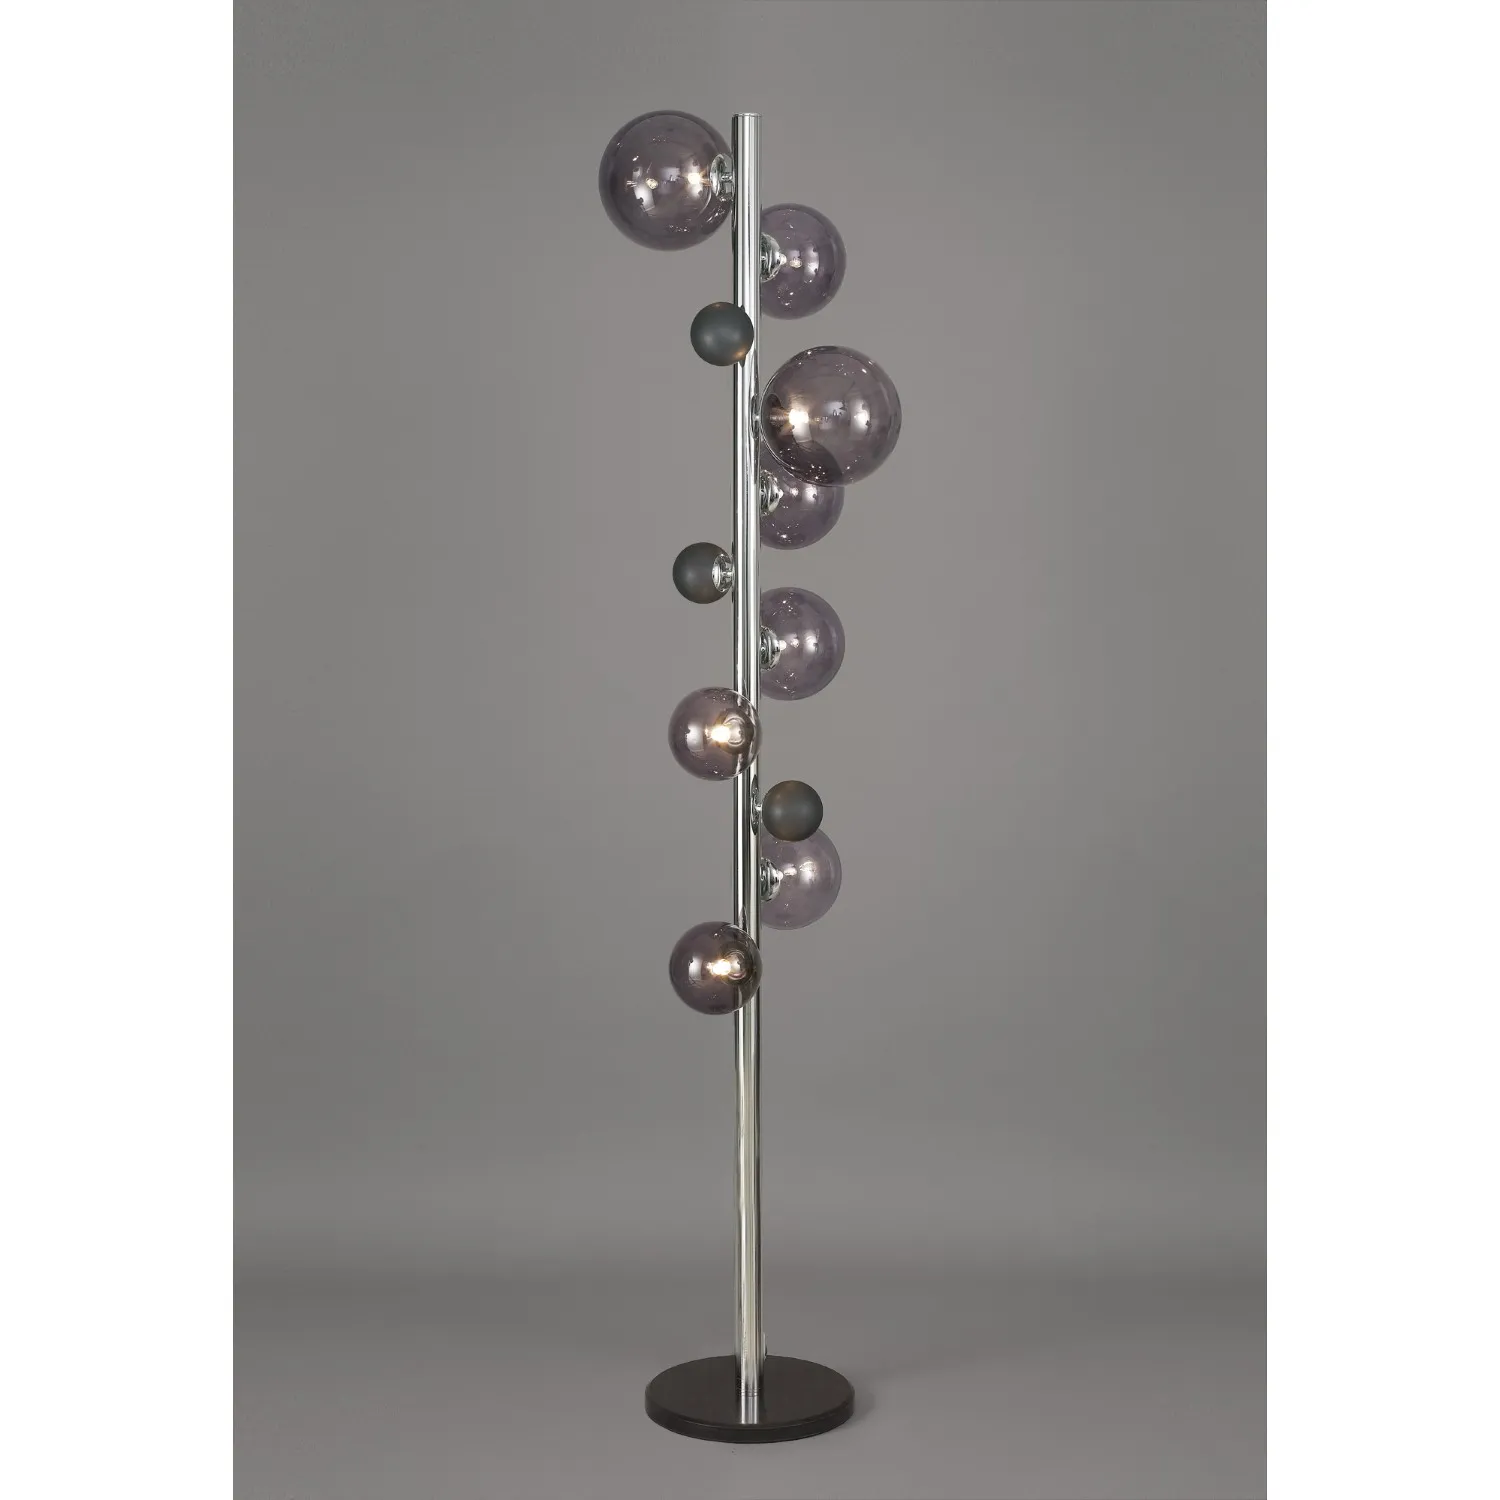 Hook Floor Lamp, 8 x G9, Polished Chrome Smoked Glass With Black Marble Base